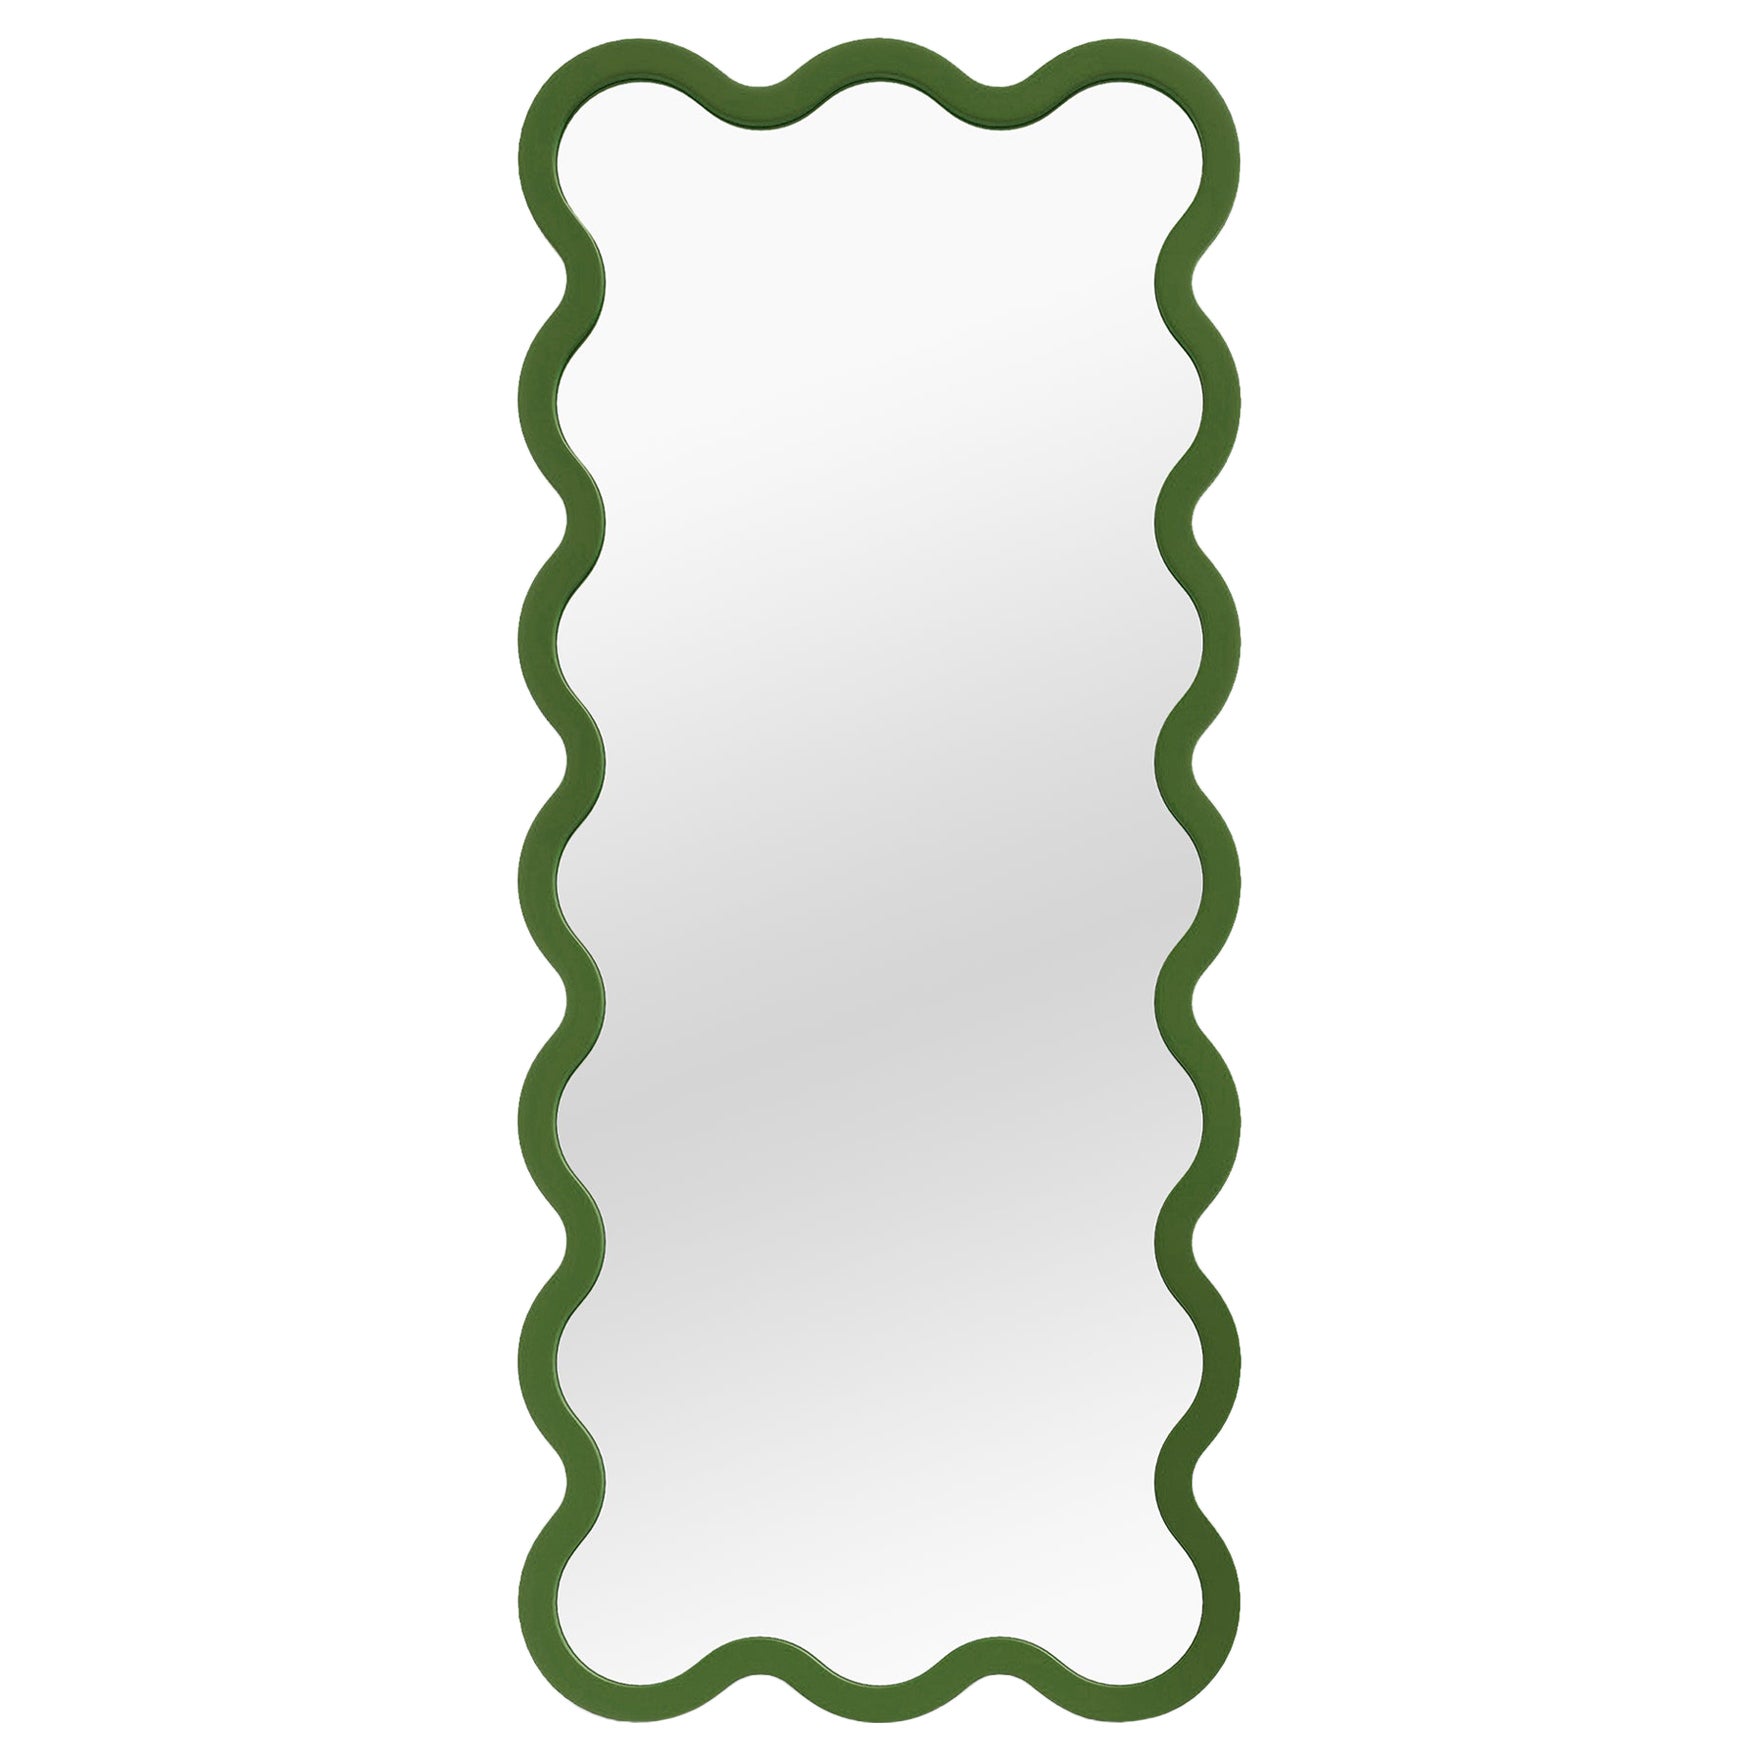 Contemporary Mirror 'Hvyli 16' by Oitoproducts, Green Frame For Sale